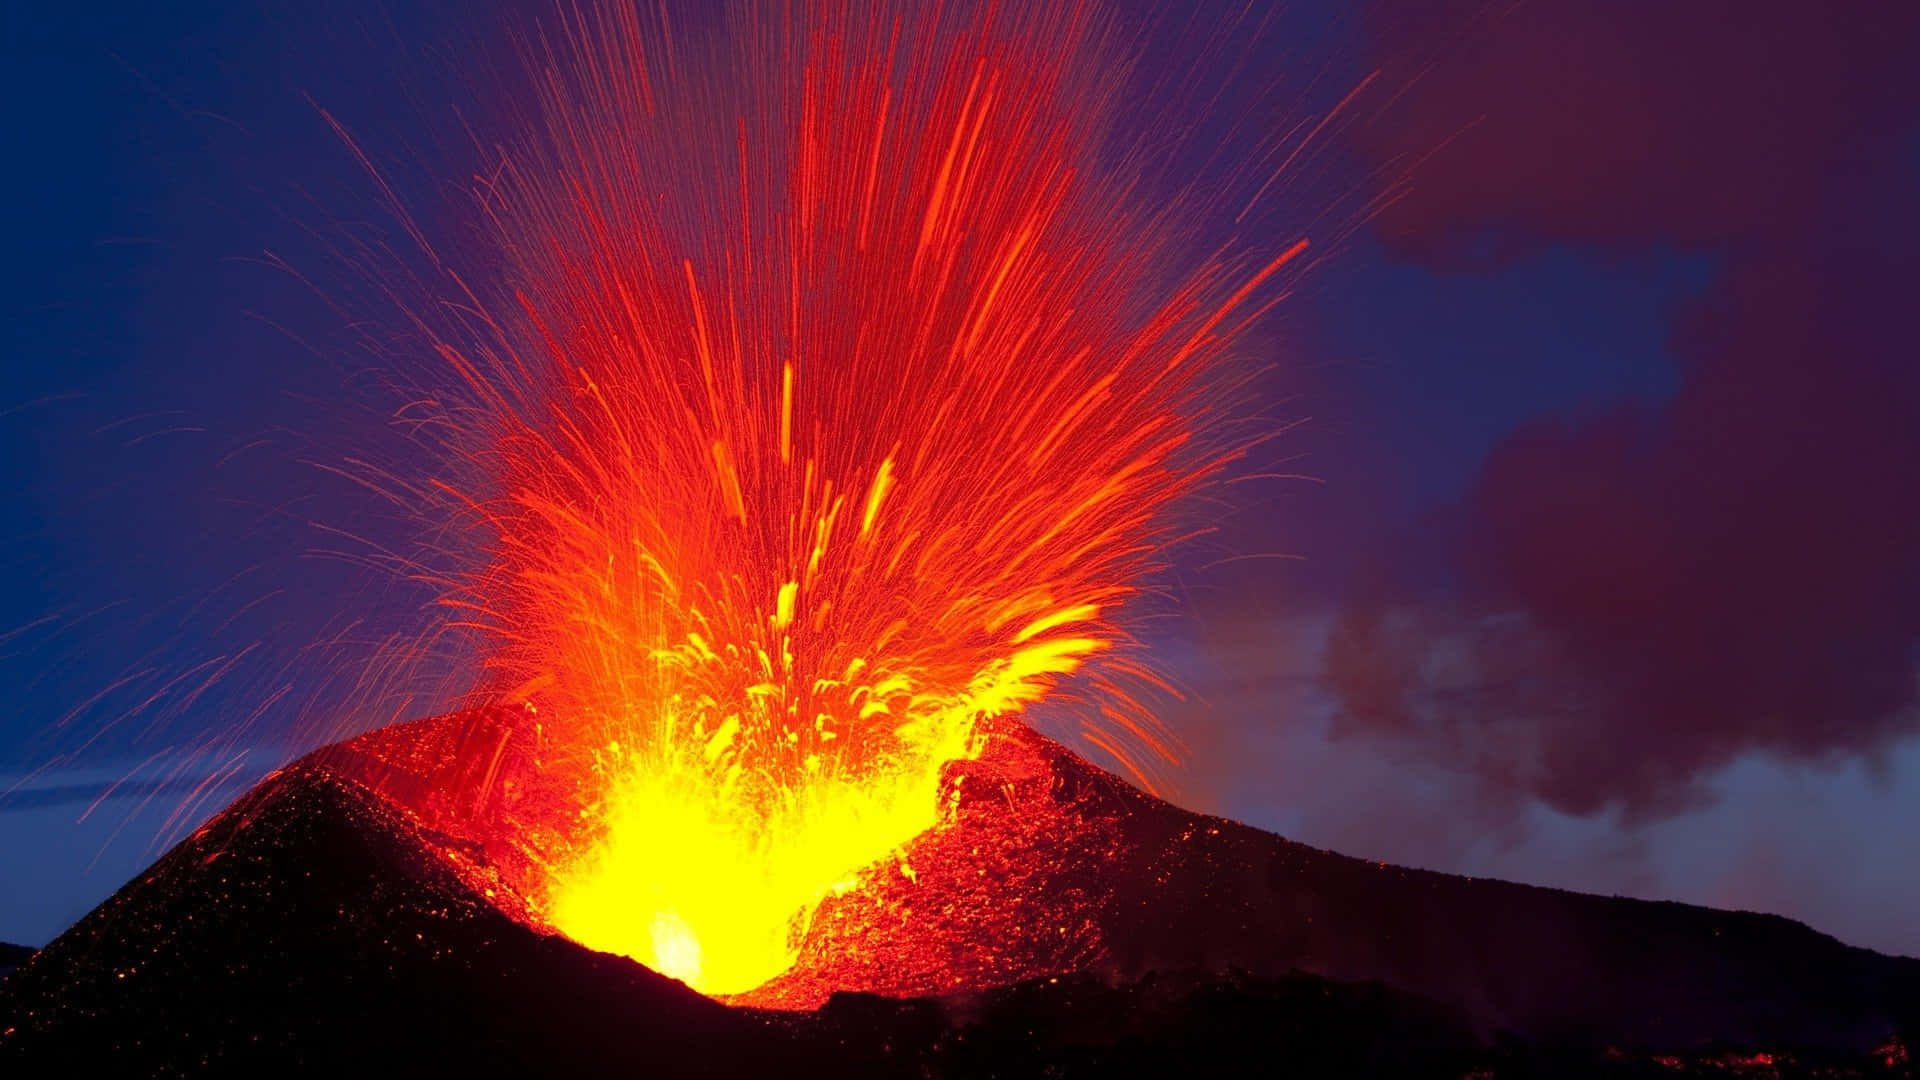 An active volcano spewing smoke and lava in a stunning location